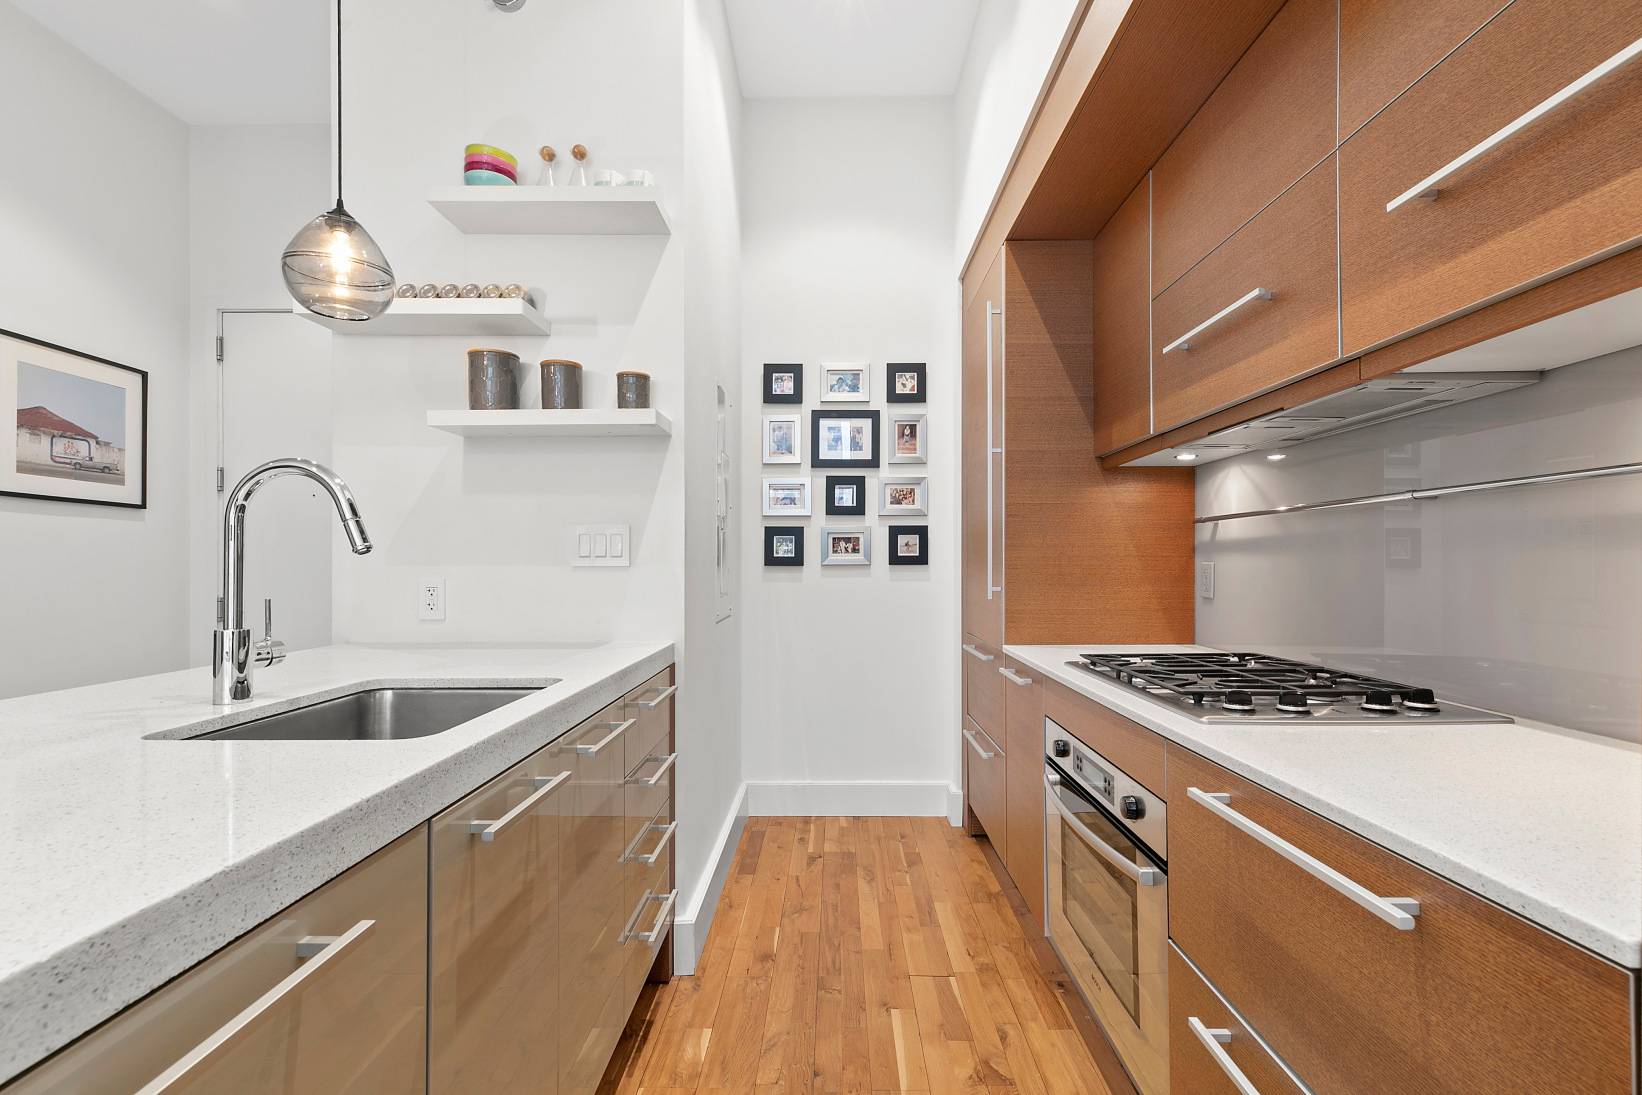 This home features a wall of windows in the living room with southern sunlight, a large walk in closet, chef's kitchen with dishwasher, vented hood, garbage disposal and Sub Zero ...